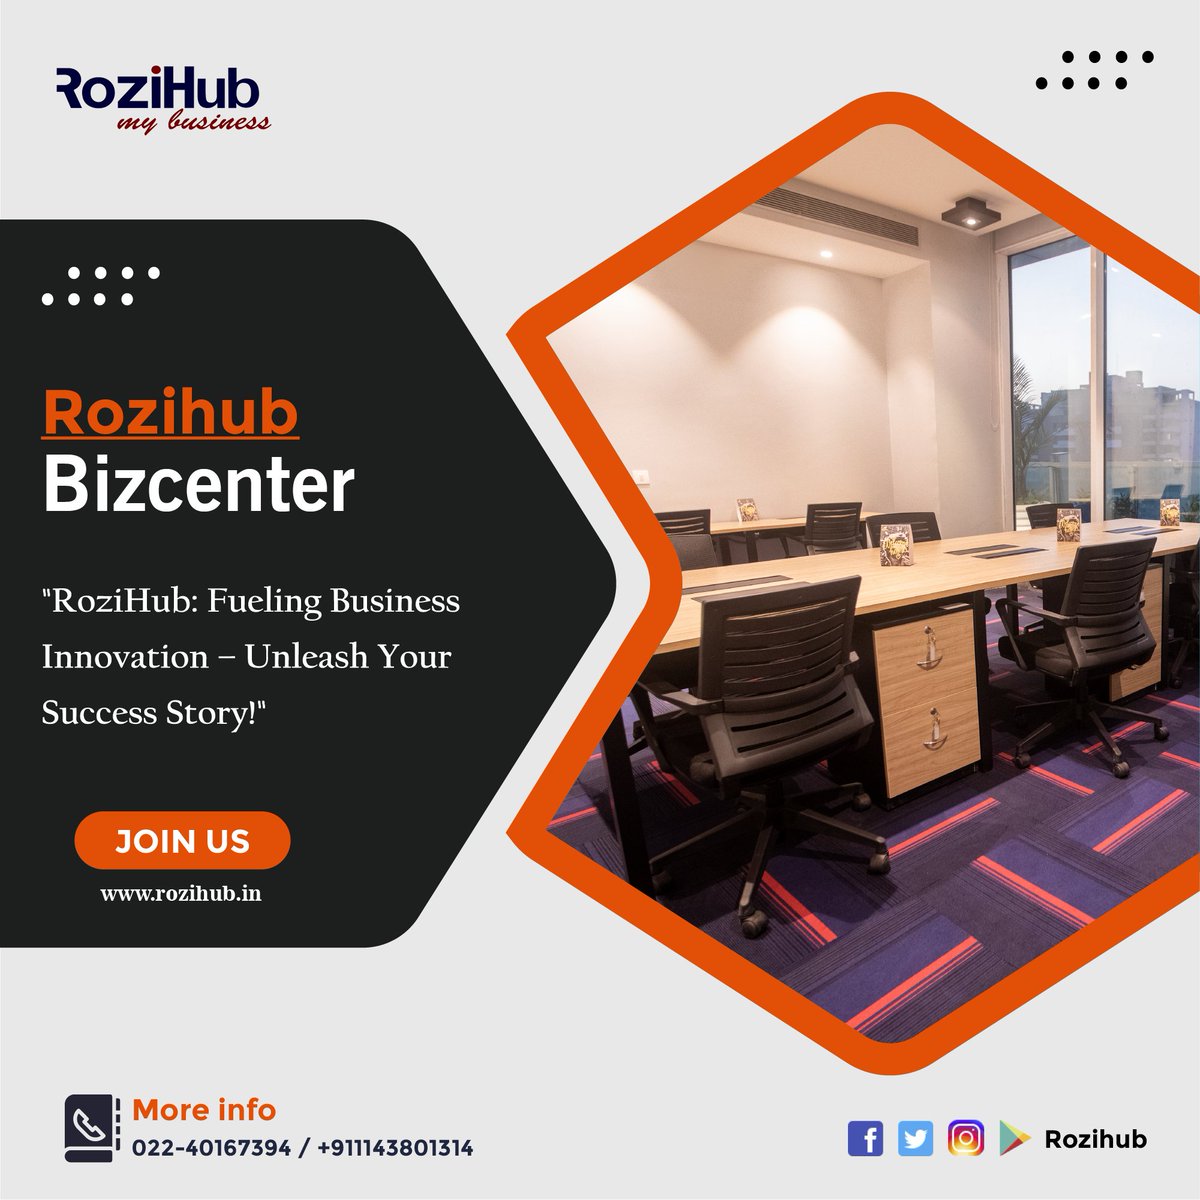 'RoziHub: Fueling Business Innovation – Unleash Your Success Story!'
#smallbusinessadvice #rozihub #delhi #mumbai #SmallBusinessGrowth  #smallbusinessnz #smallbusinessconsultant #smallbusinesses #virtualshopping #coworking #cafes #meetingspace #skilledworkers #Professional